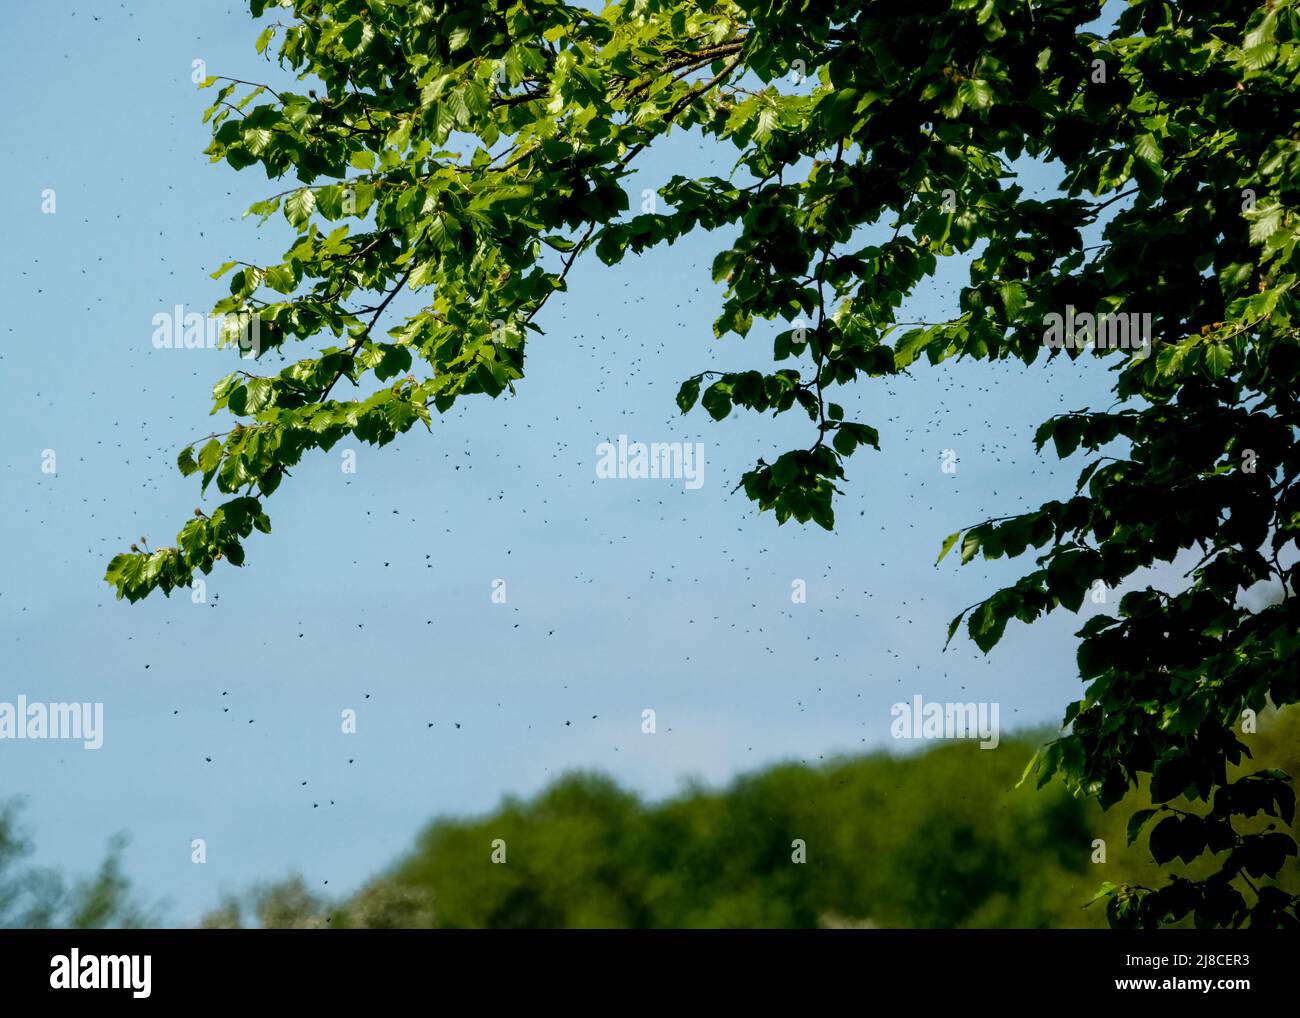 hundreds of hovering flies, midges, gnats in the shade of a beech tree, blue sky background Stock Photo